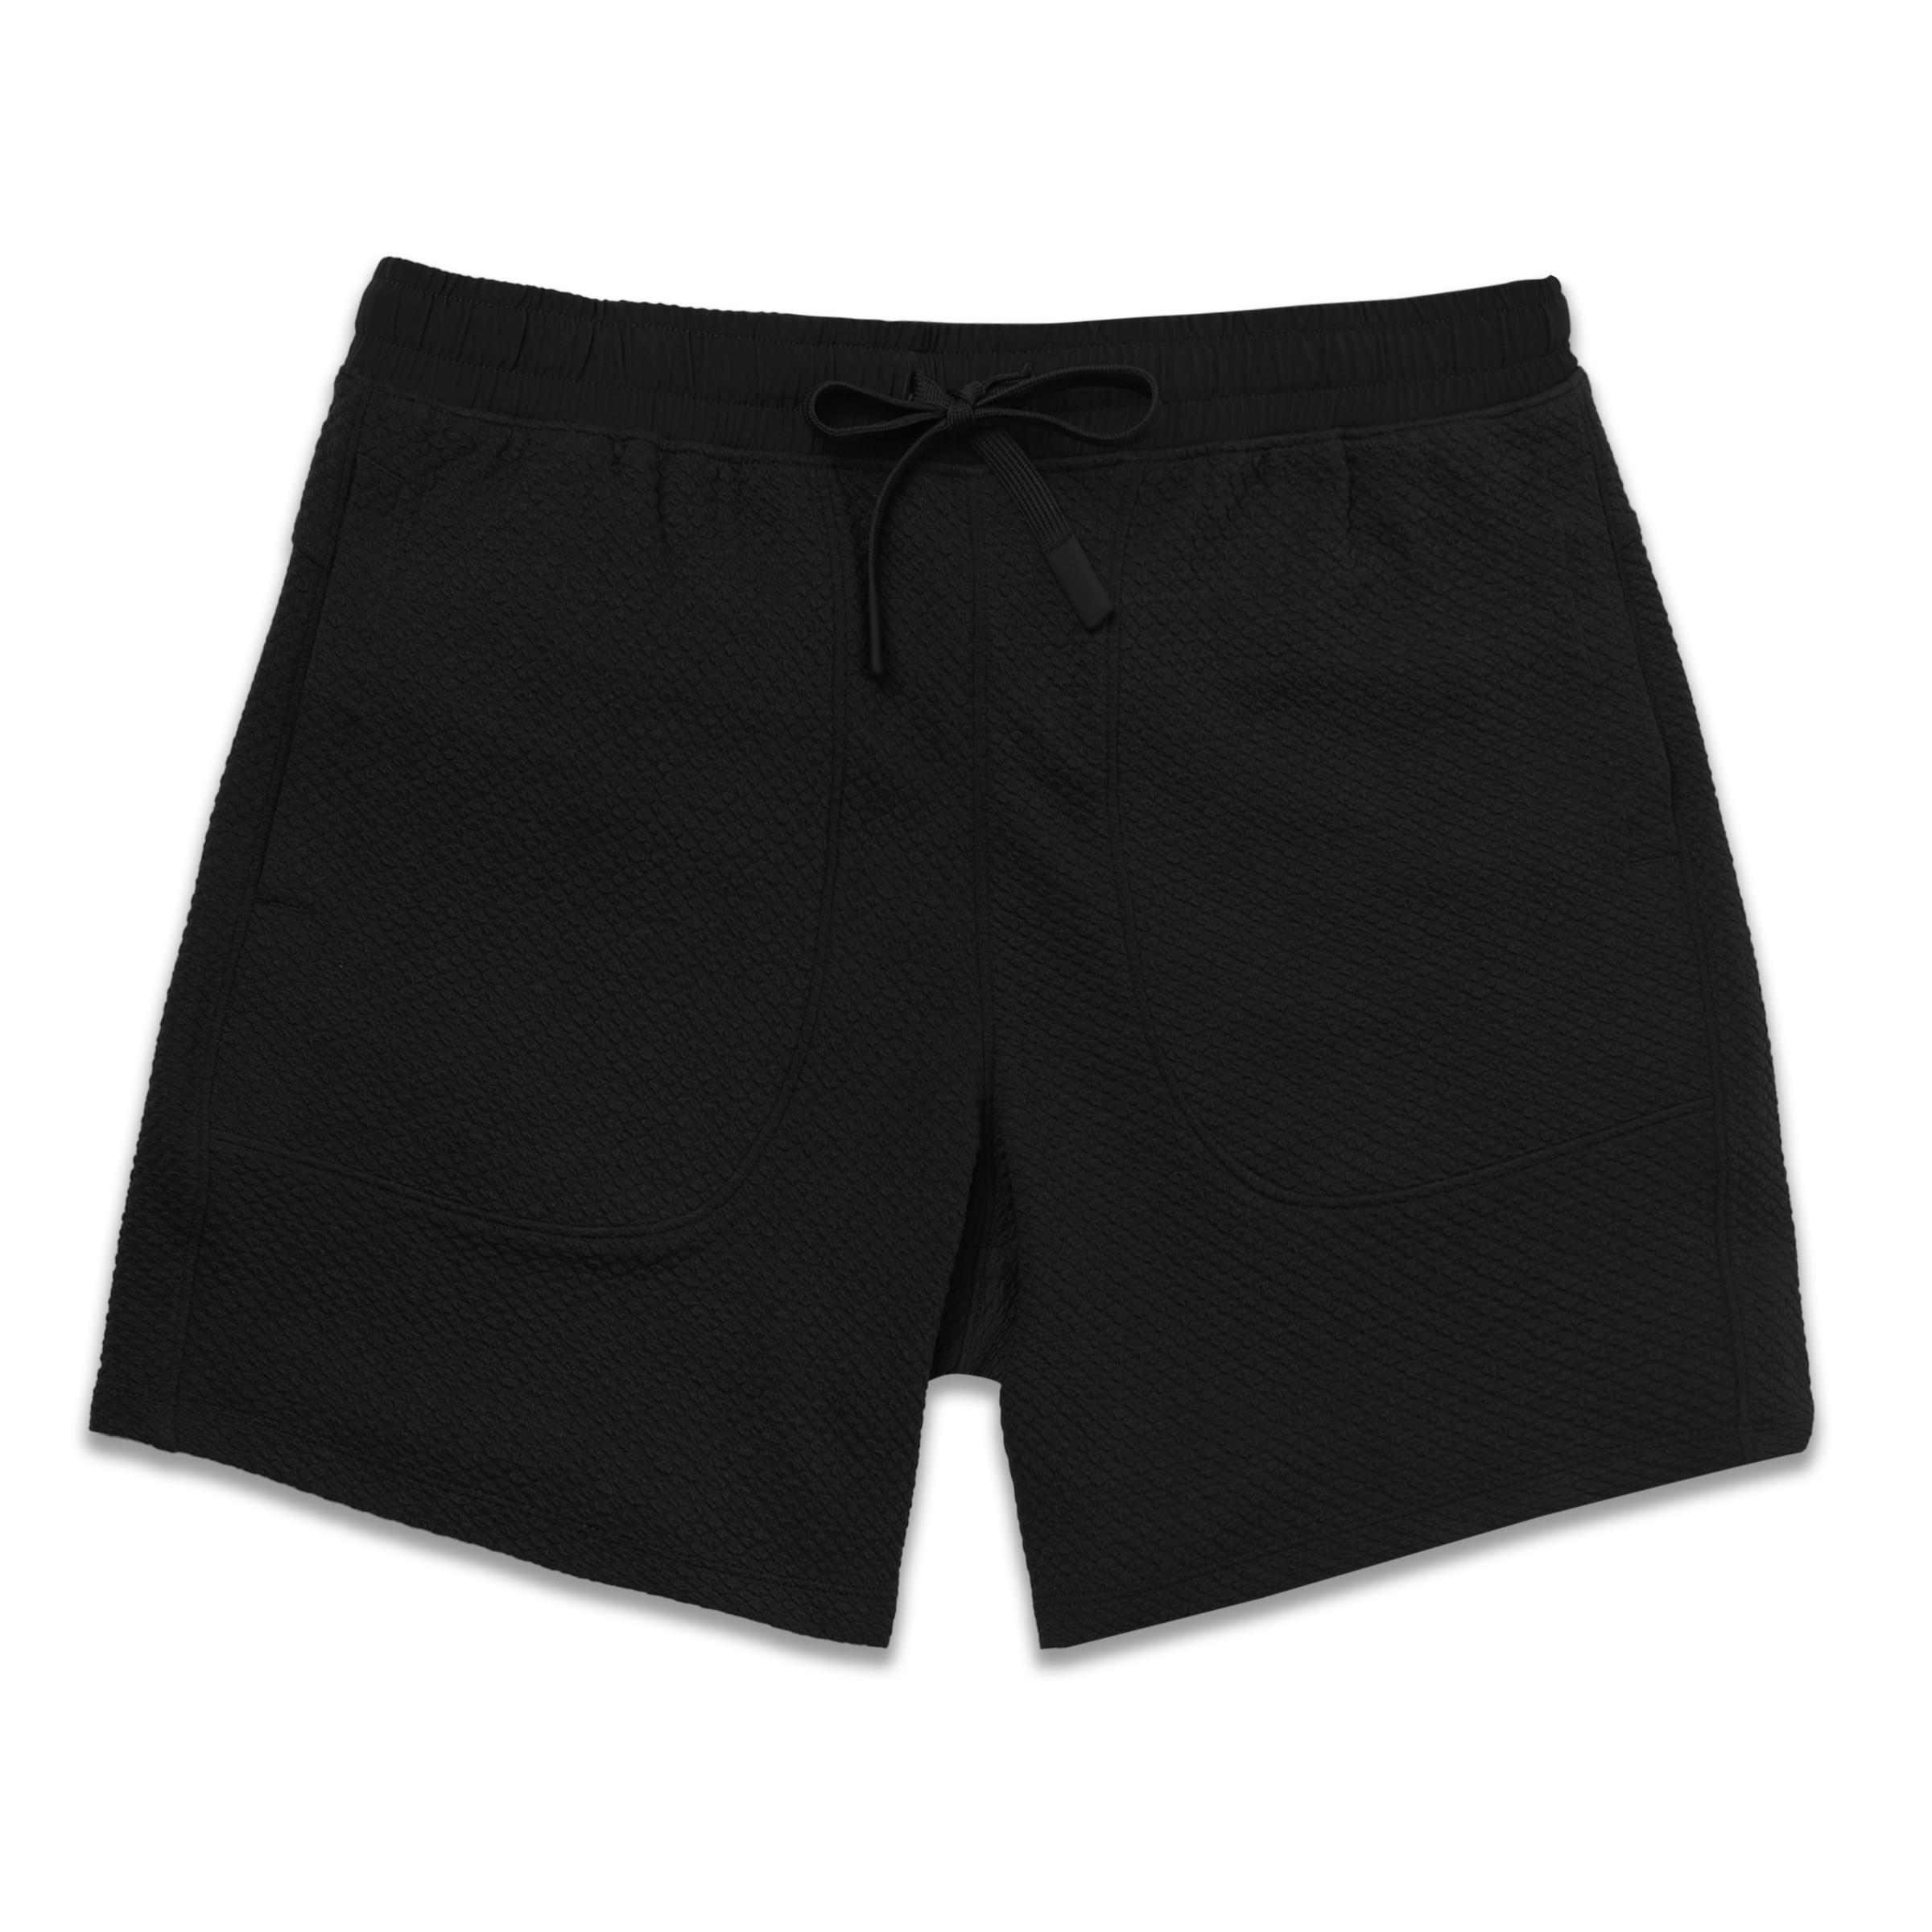 Roam Short 7" Black front with an elastic waistband, two side seam pockets, and dyed to match drawstring